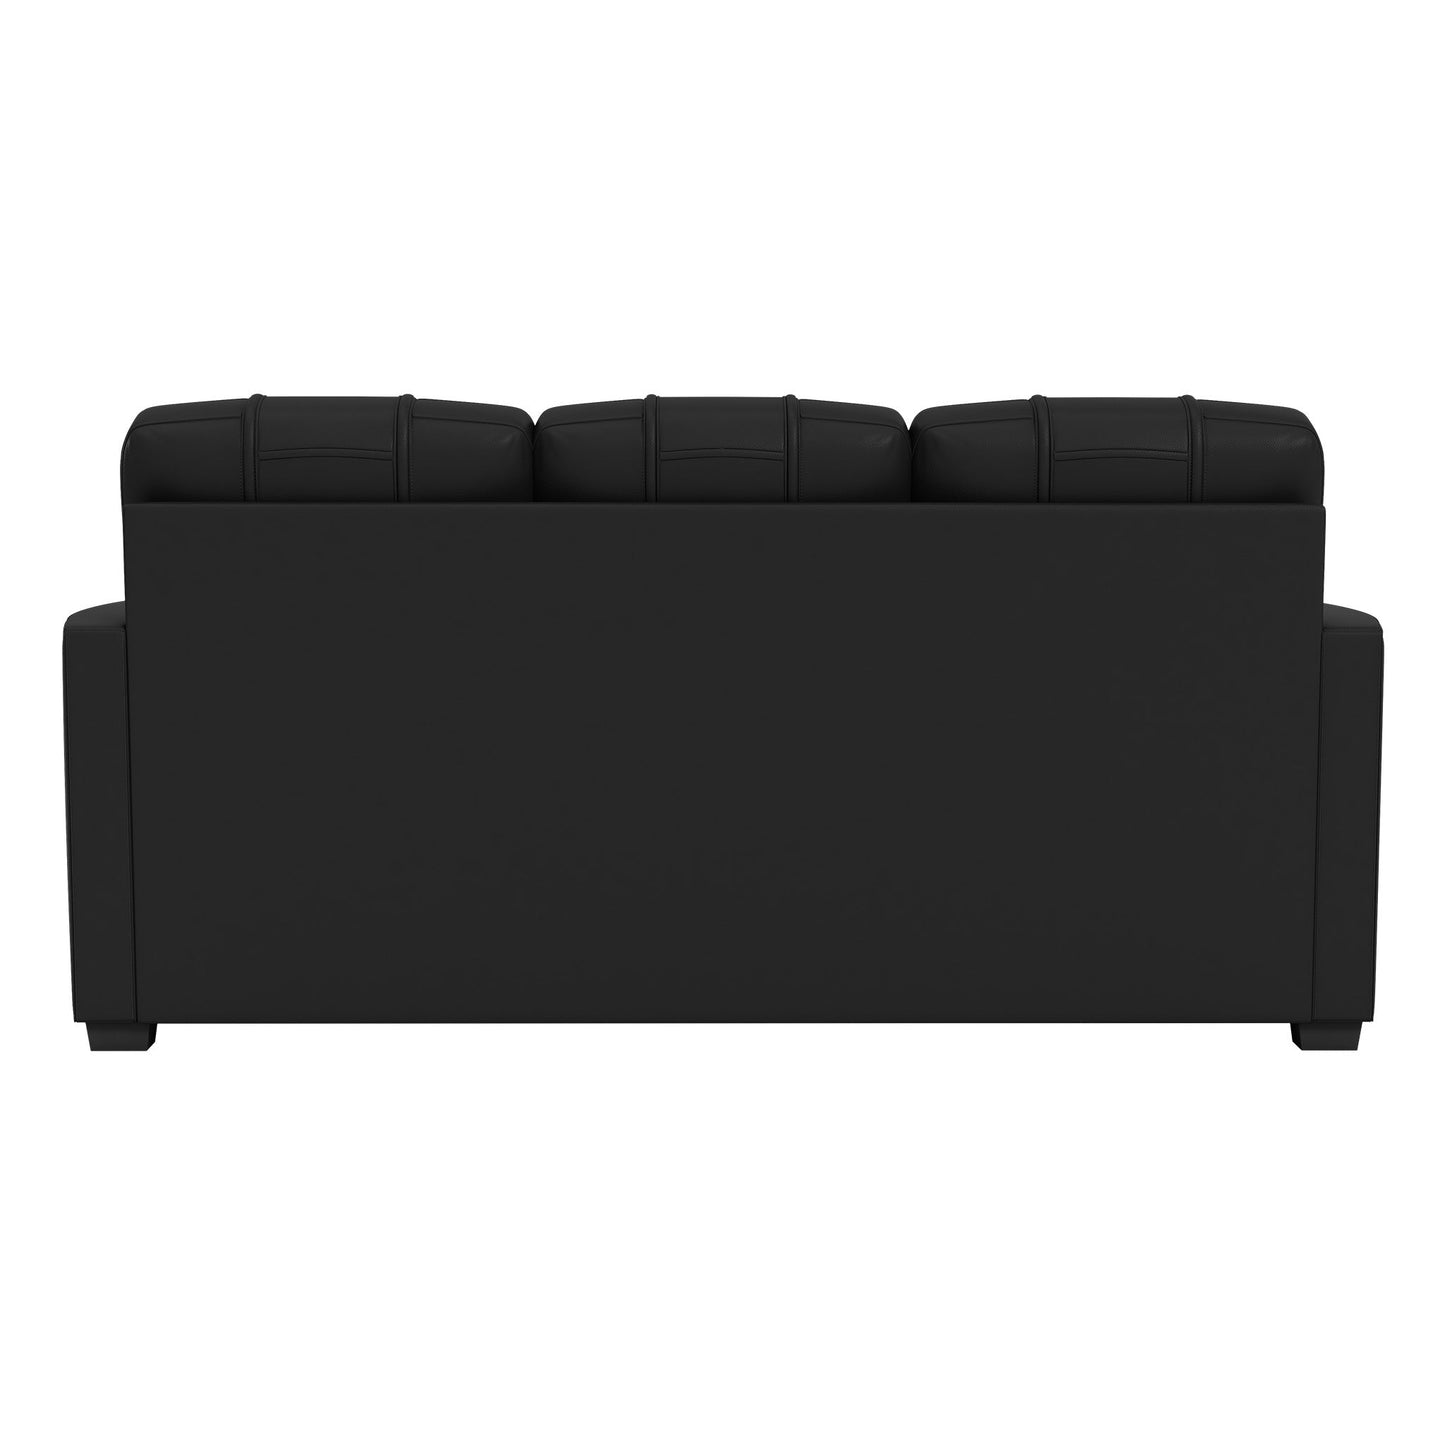 Silver Sofa with Celtics Crossover Gaming Primary [CAN ONLY BE SHIPPED TO MASSACHUSETTS]